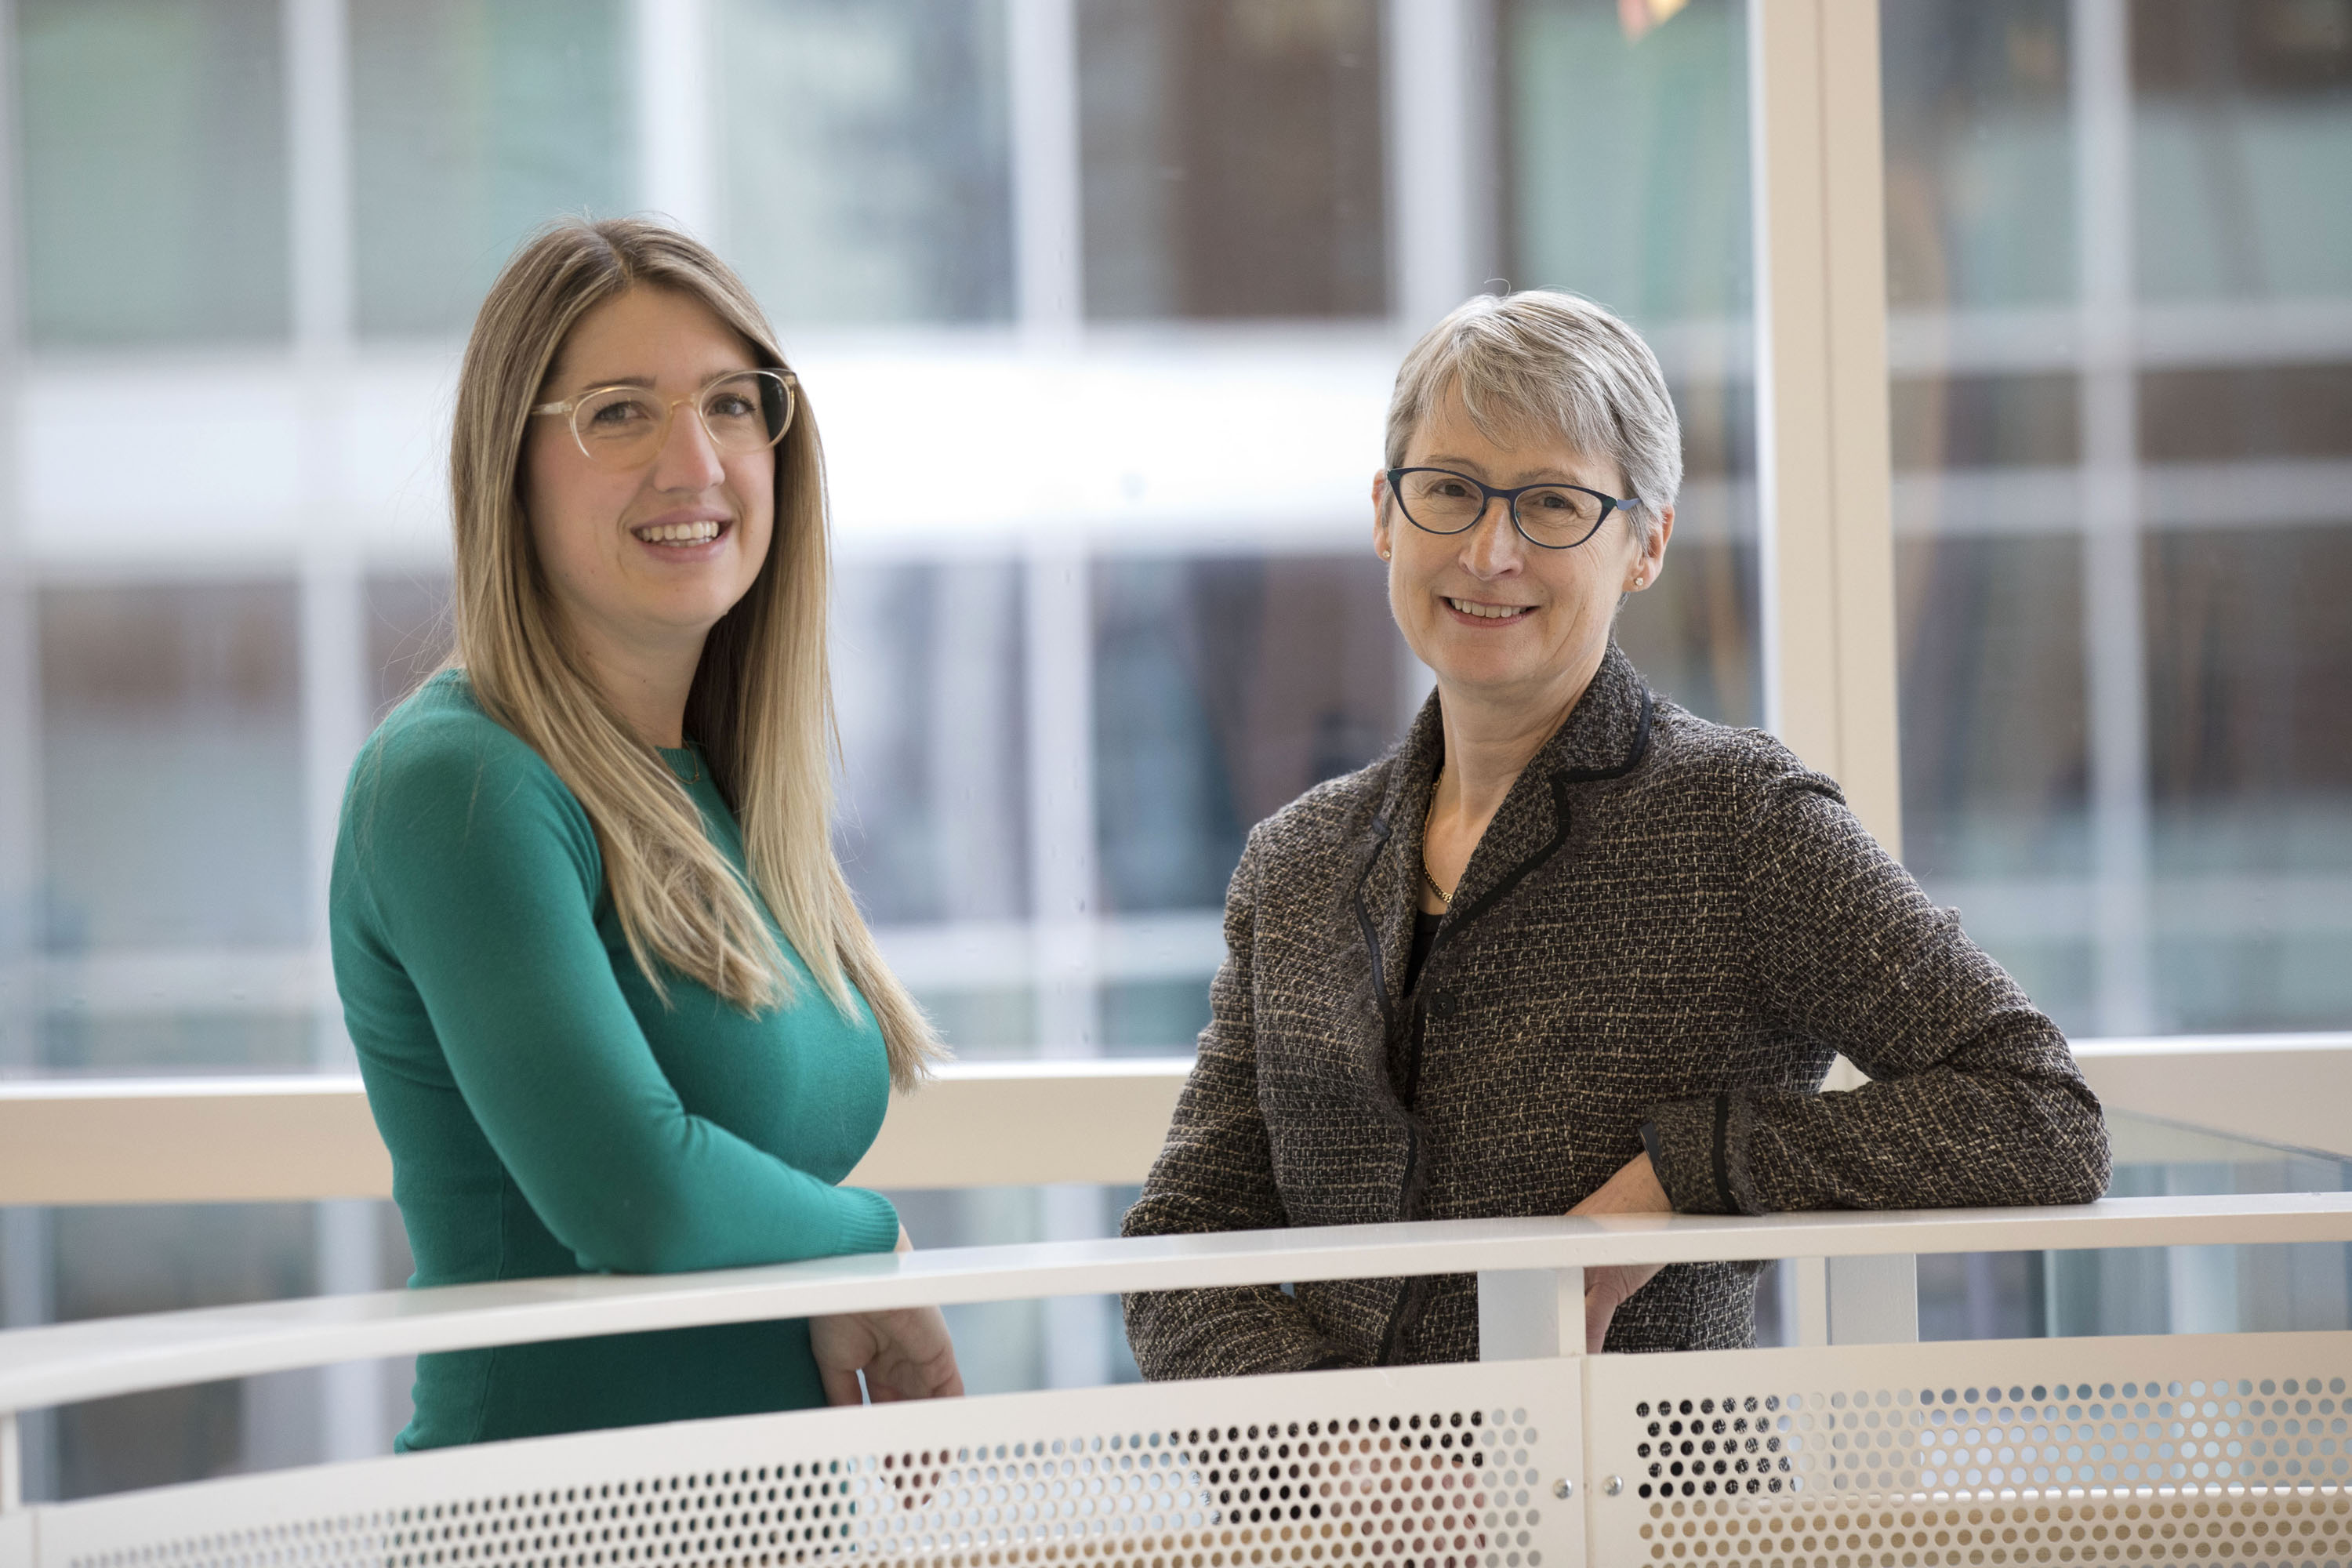 Professors Sarah Carsley and Patricia Parkin, courtesy of The Hospital for Sick Children